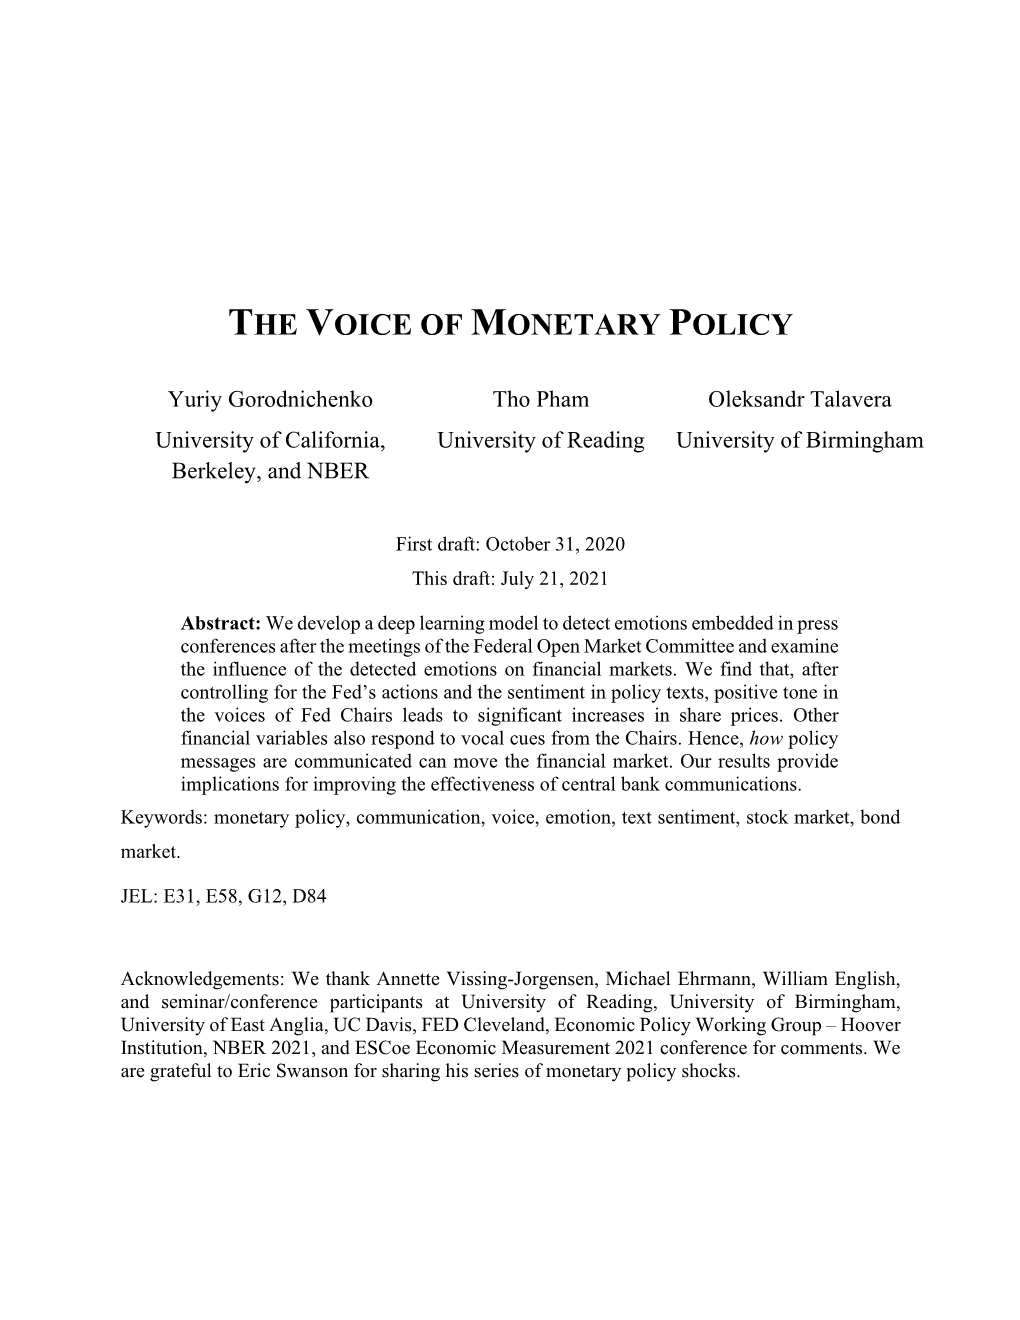 The Voice of Monetary Policy